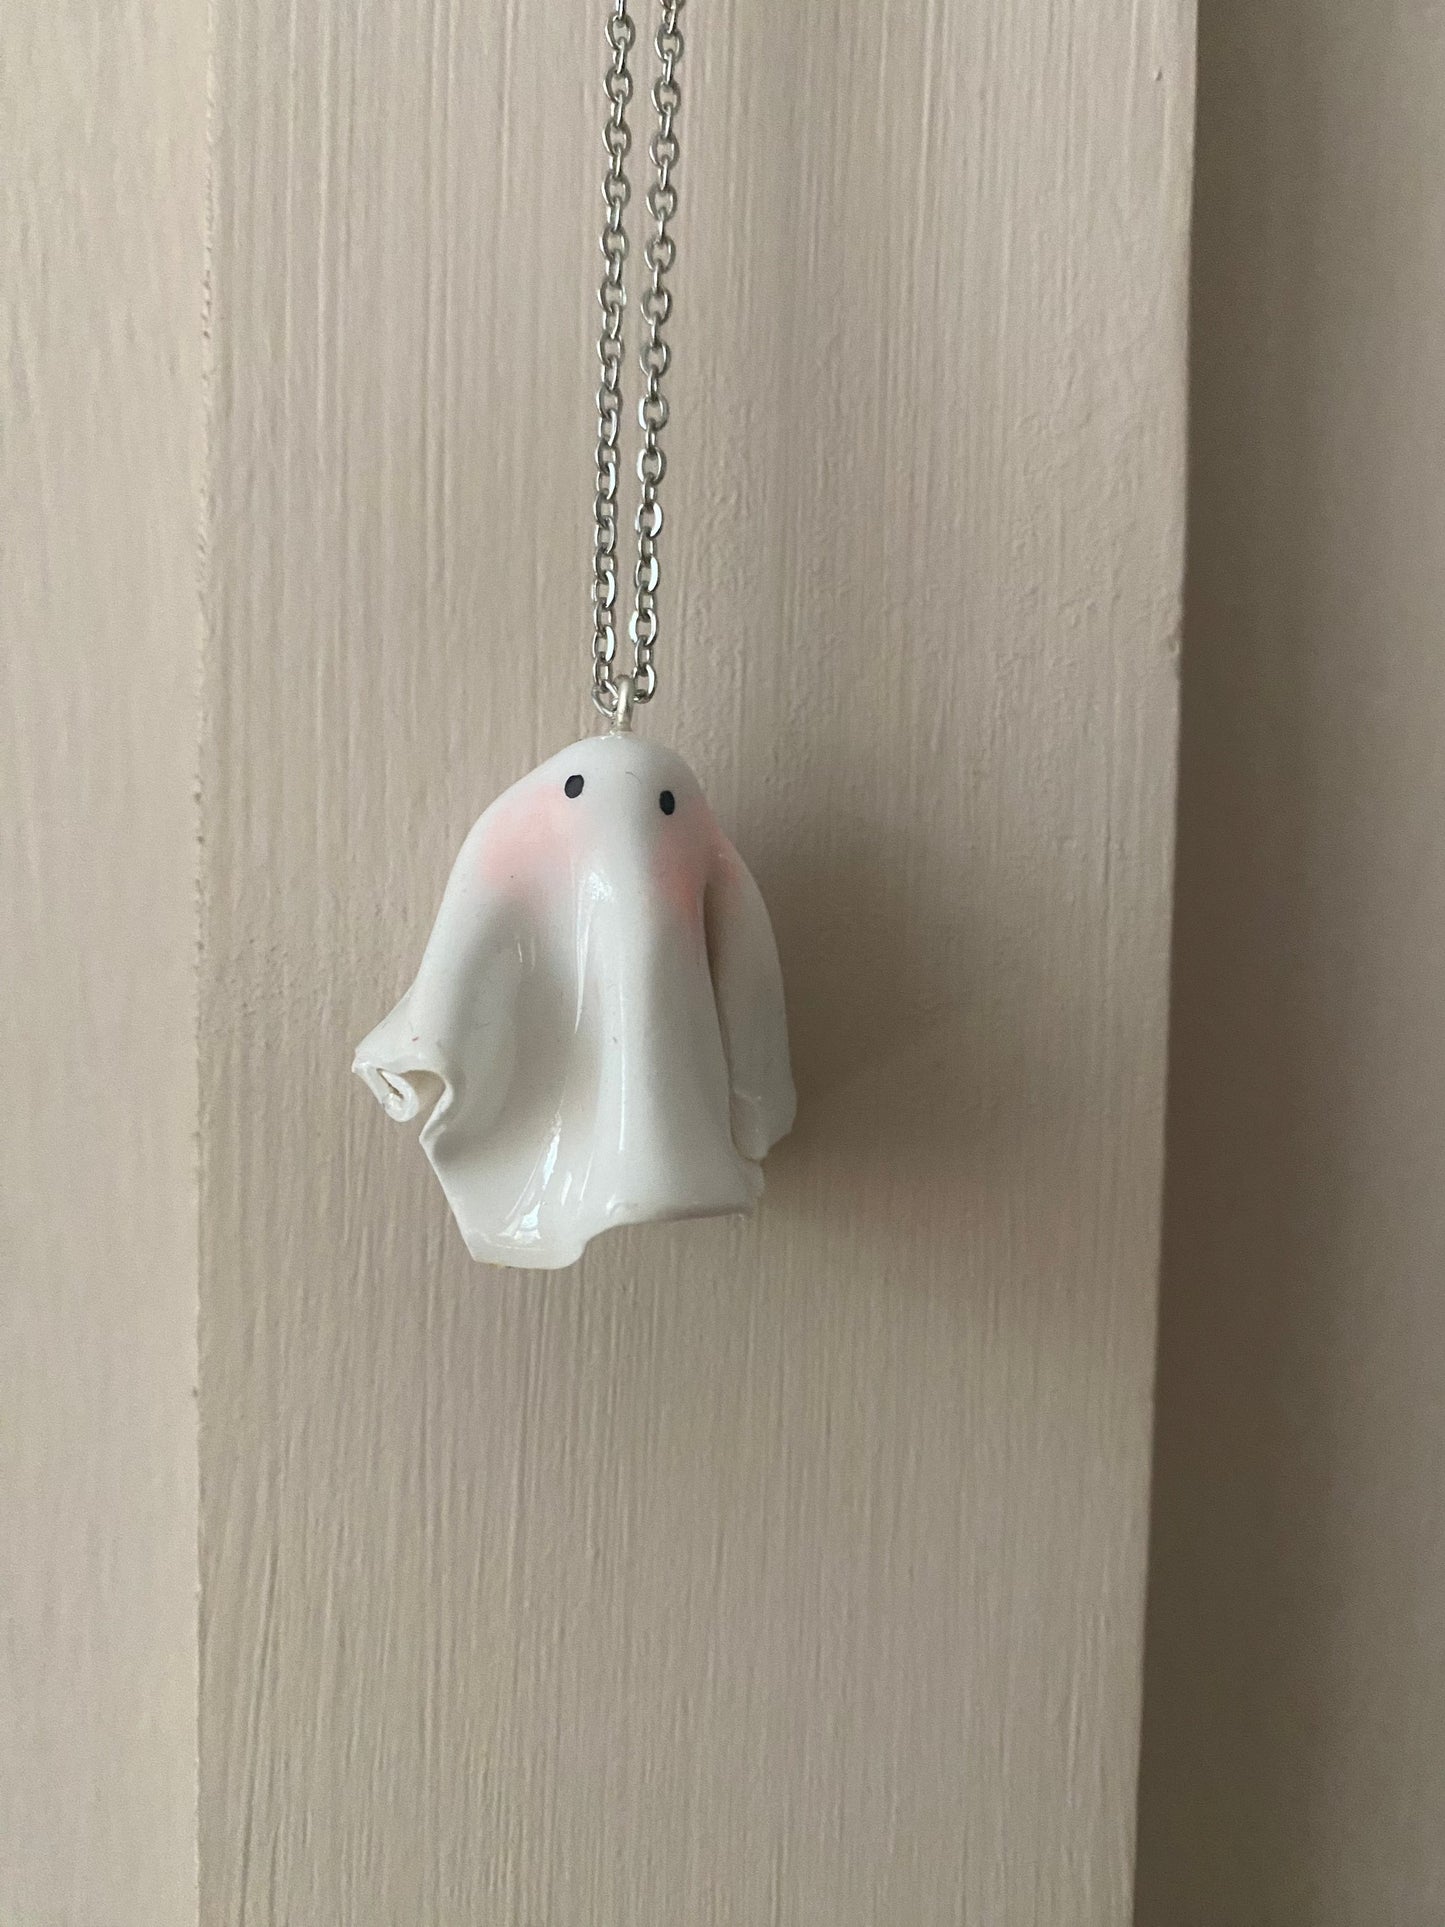 Worried souls ghost necklaces